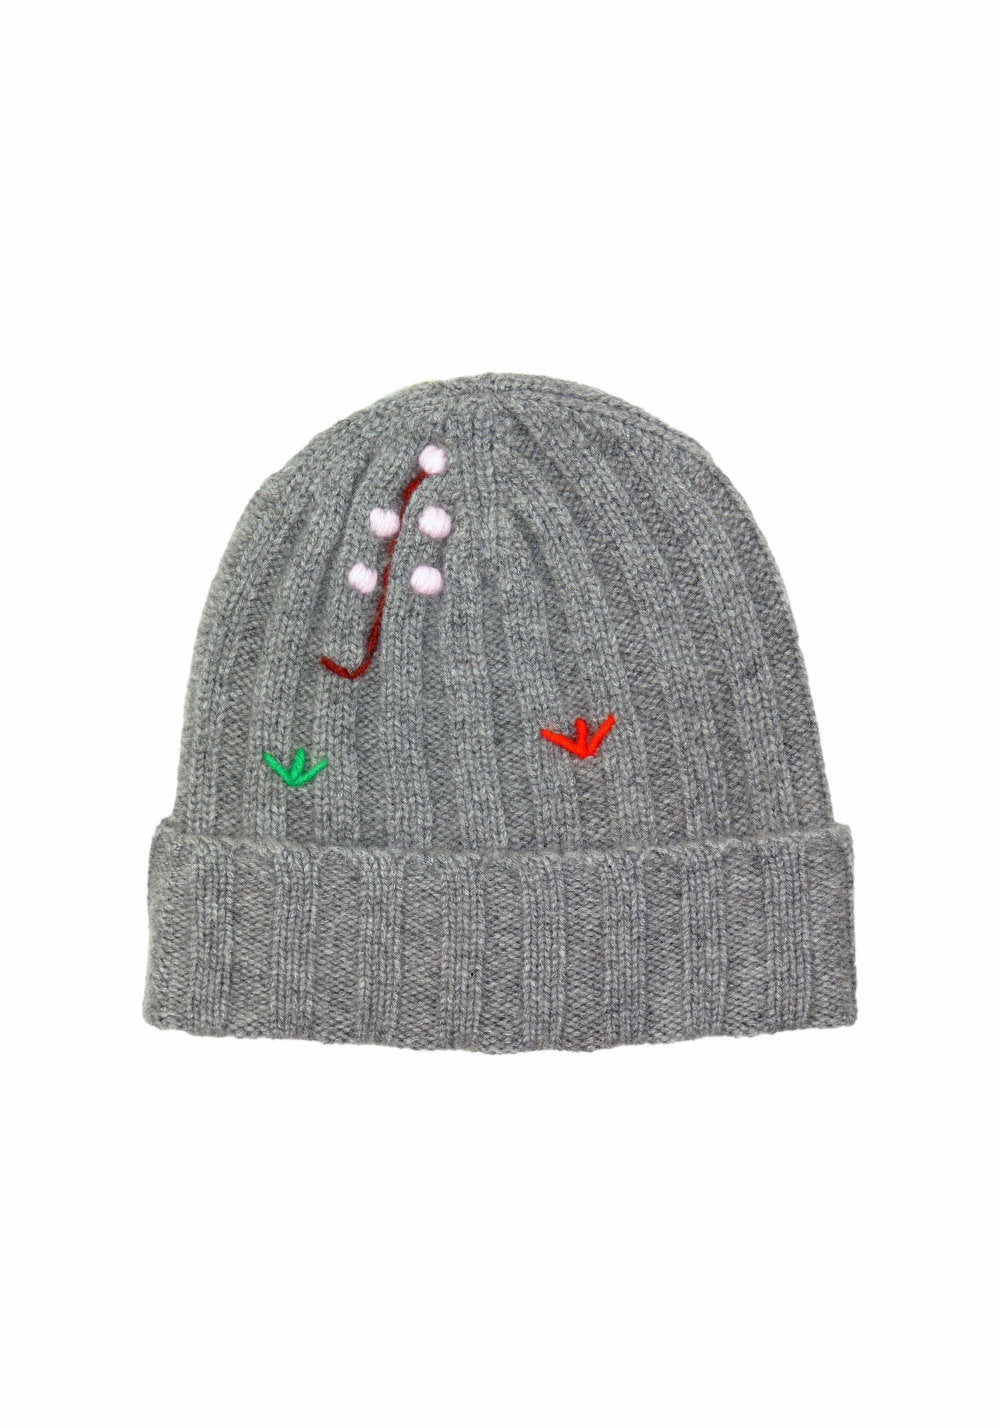 RIBBED EMBROIDERED BEANIE - AUTUMN CASHMERE